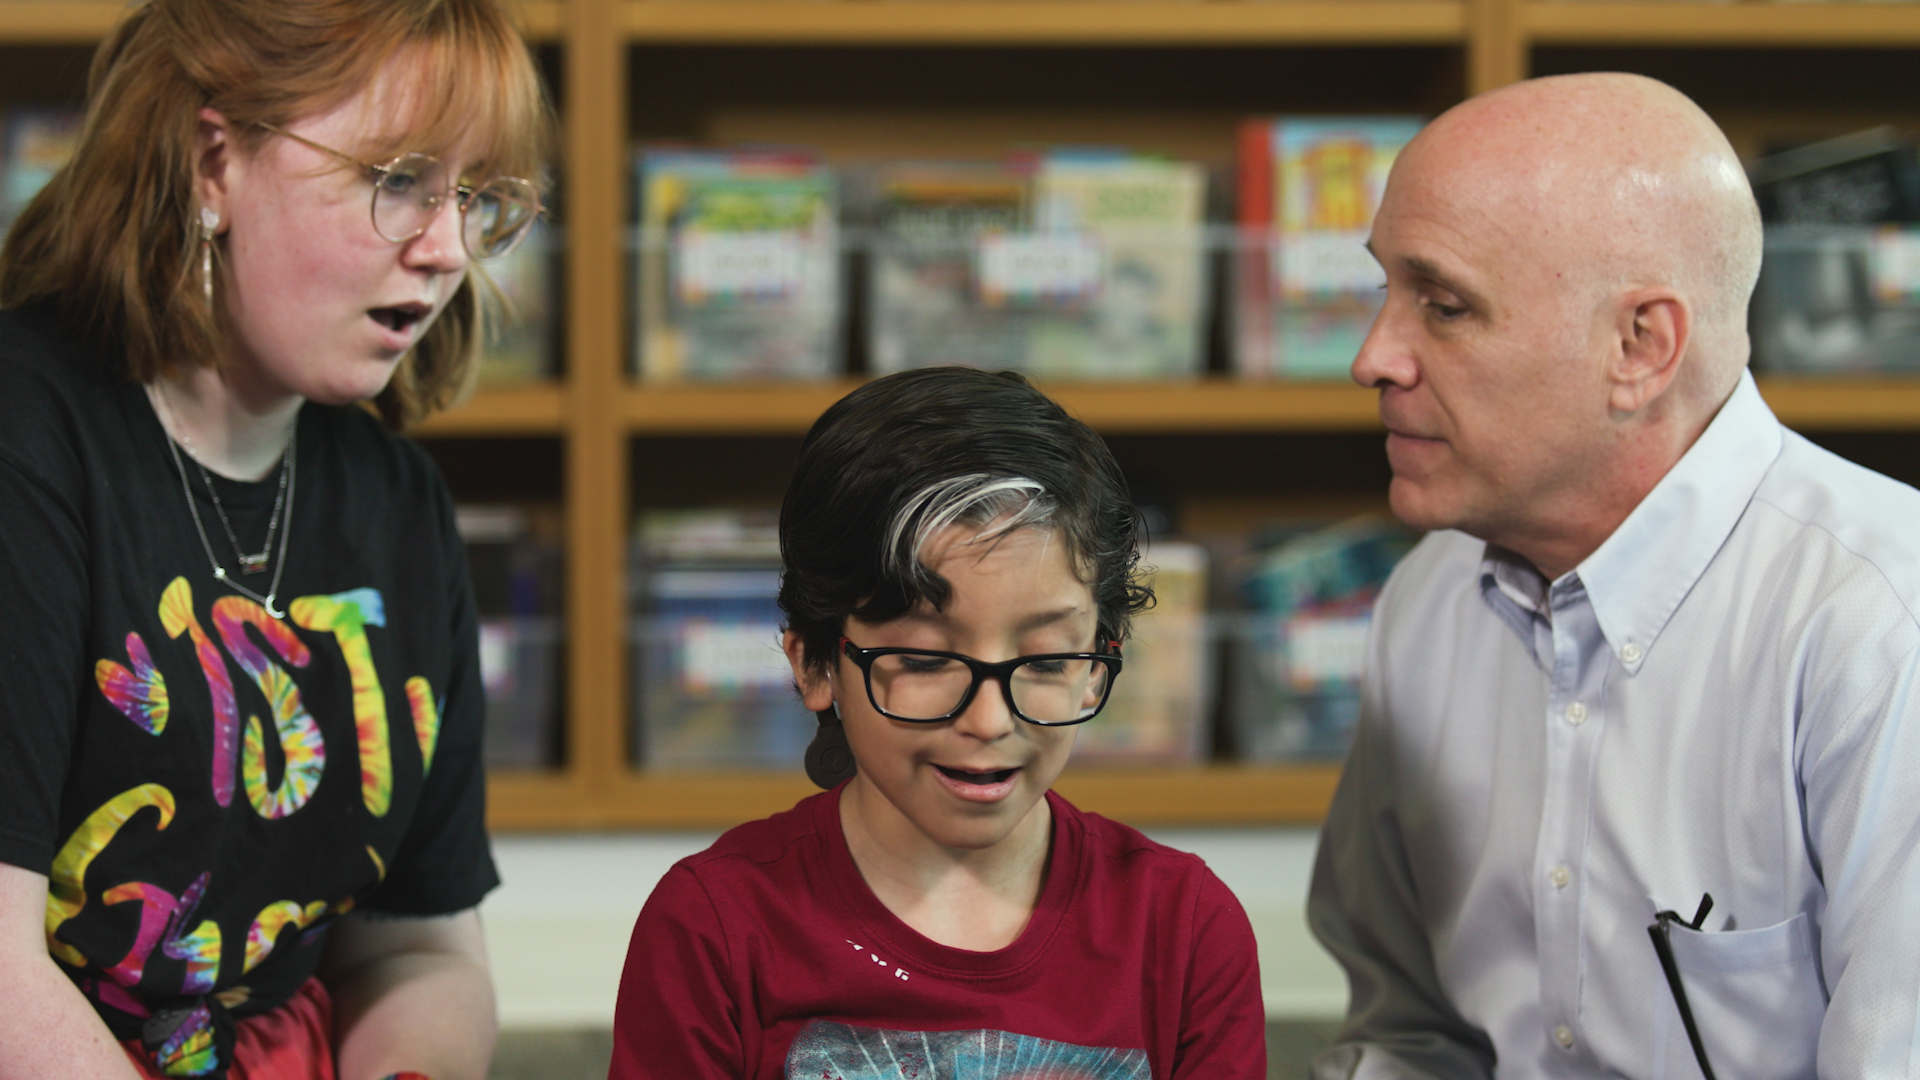 A deaf education student sits with a child who has a cochlear implant and the DEHS Program Director in front of an elementary school library stack